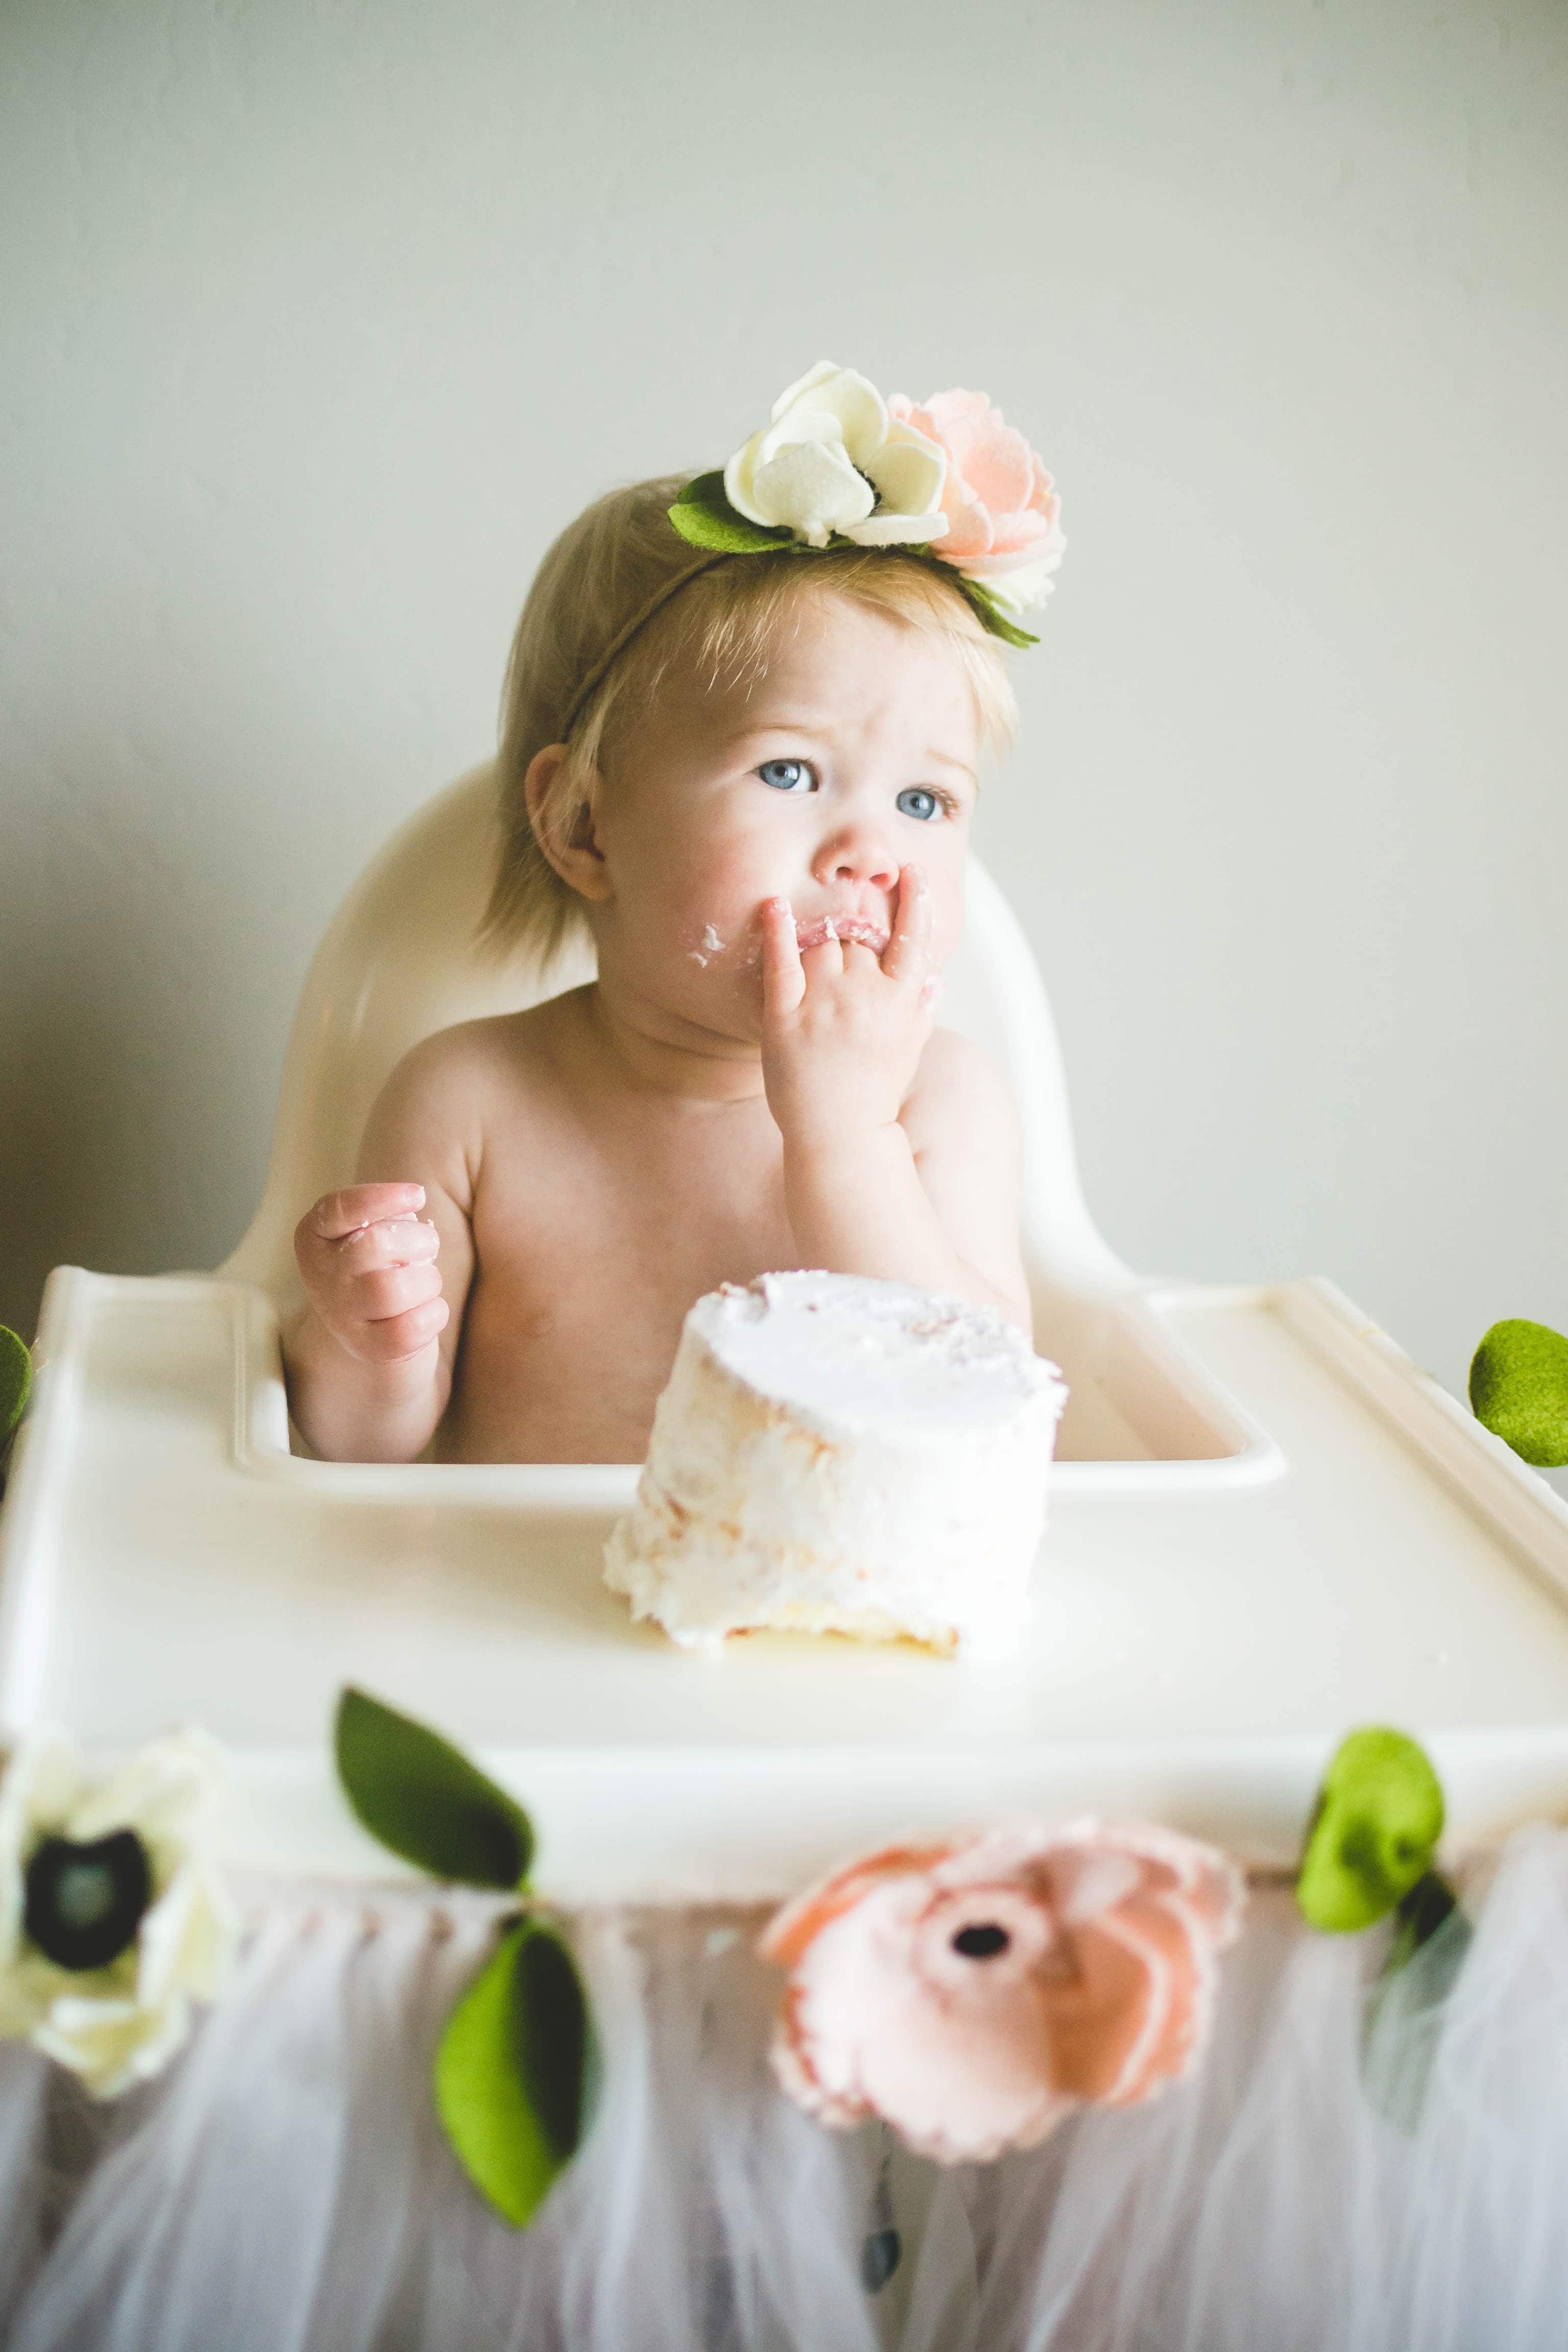 Blonde baby girl wearing floral headband sucks fingers in high chair with birthday cake.